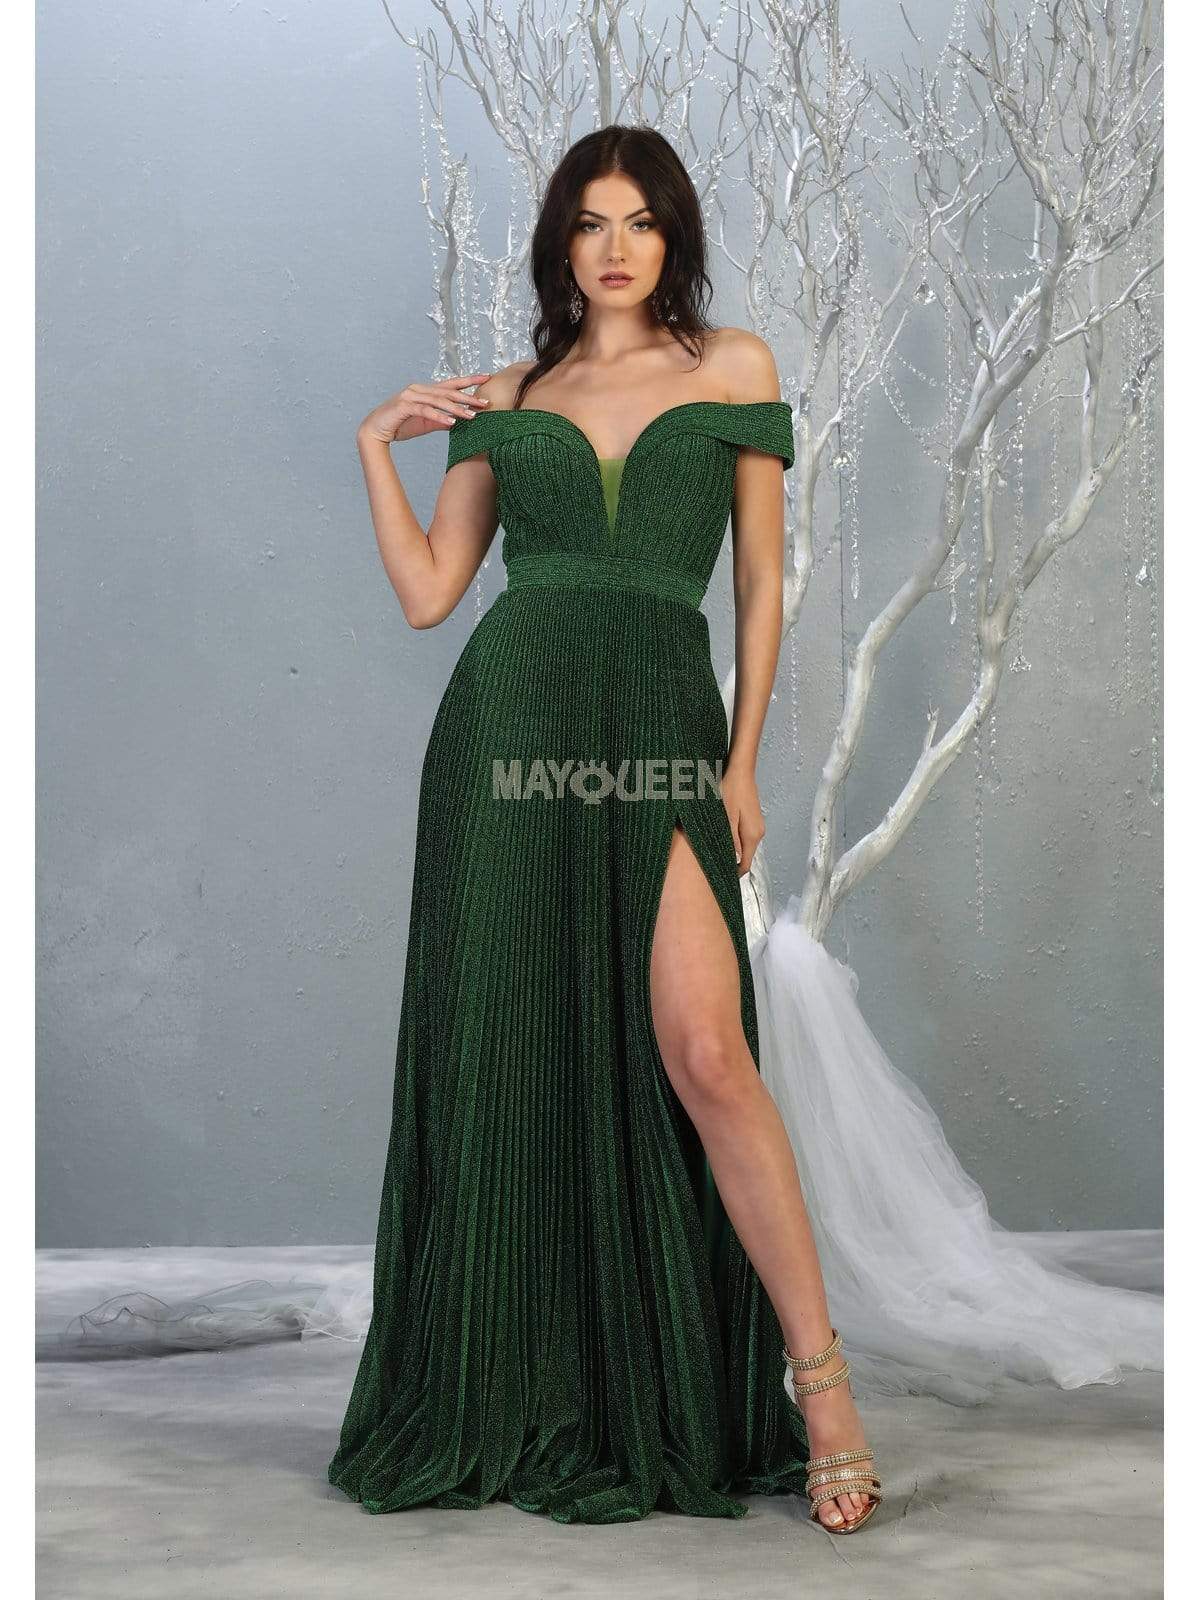 May Queen - RQ7876 Off-Shoulder Pleated A-Line Dress Evening Dresses 4 / Hunter-Grn